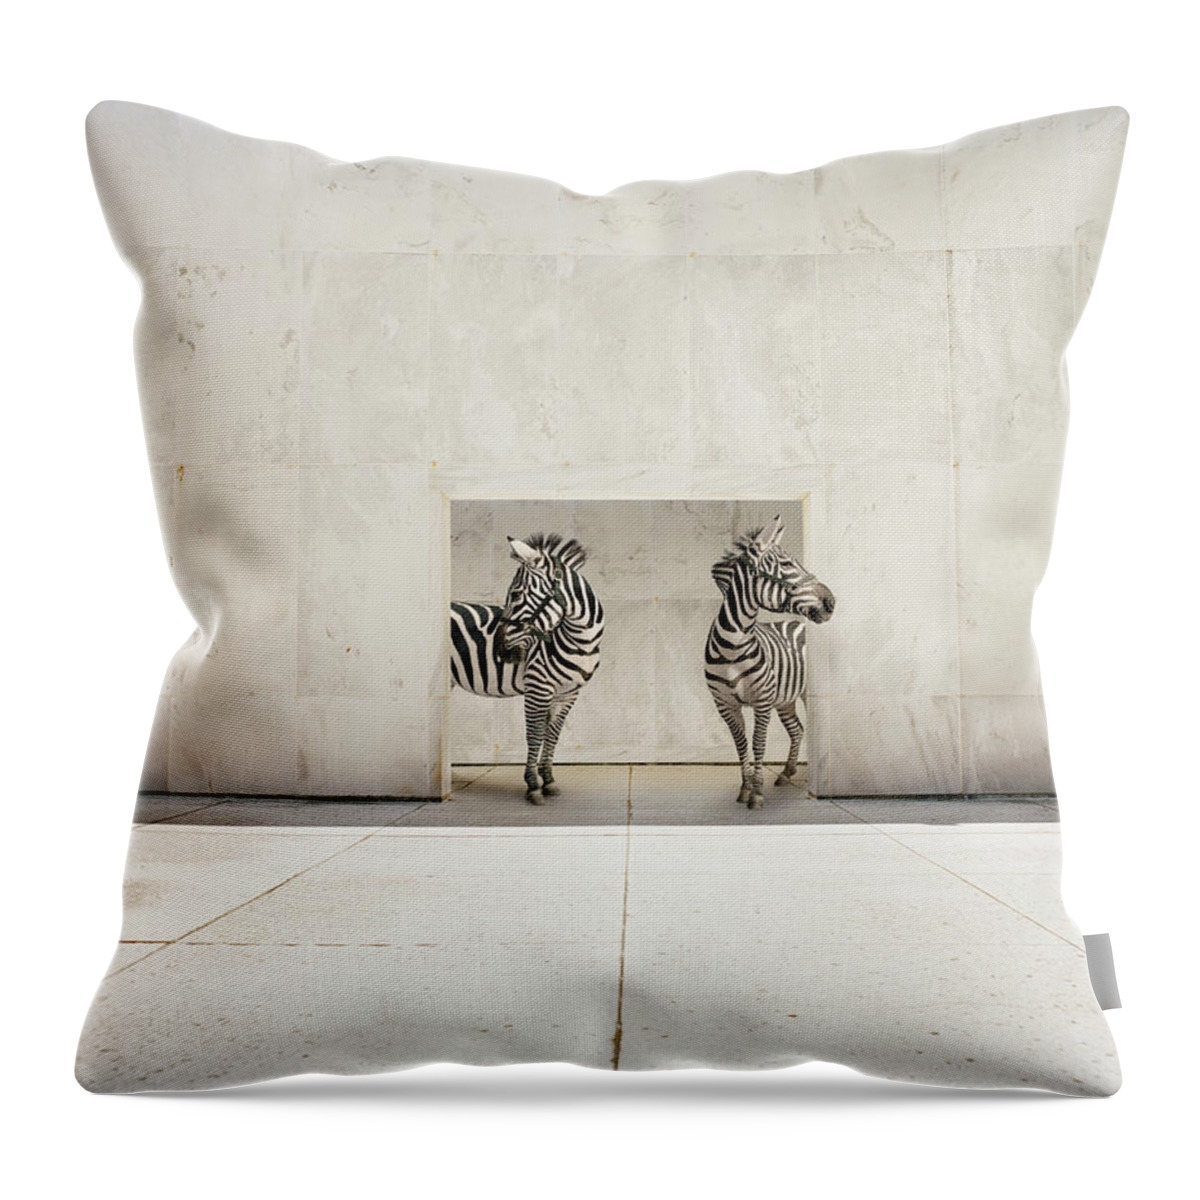 #faatoppicks Throw Pillow featuring the photograph Two Zebras At Doorway Of Large White by Matthias Clamer